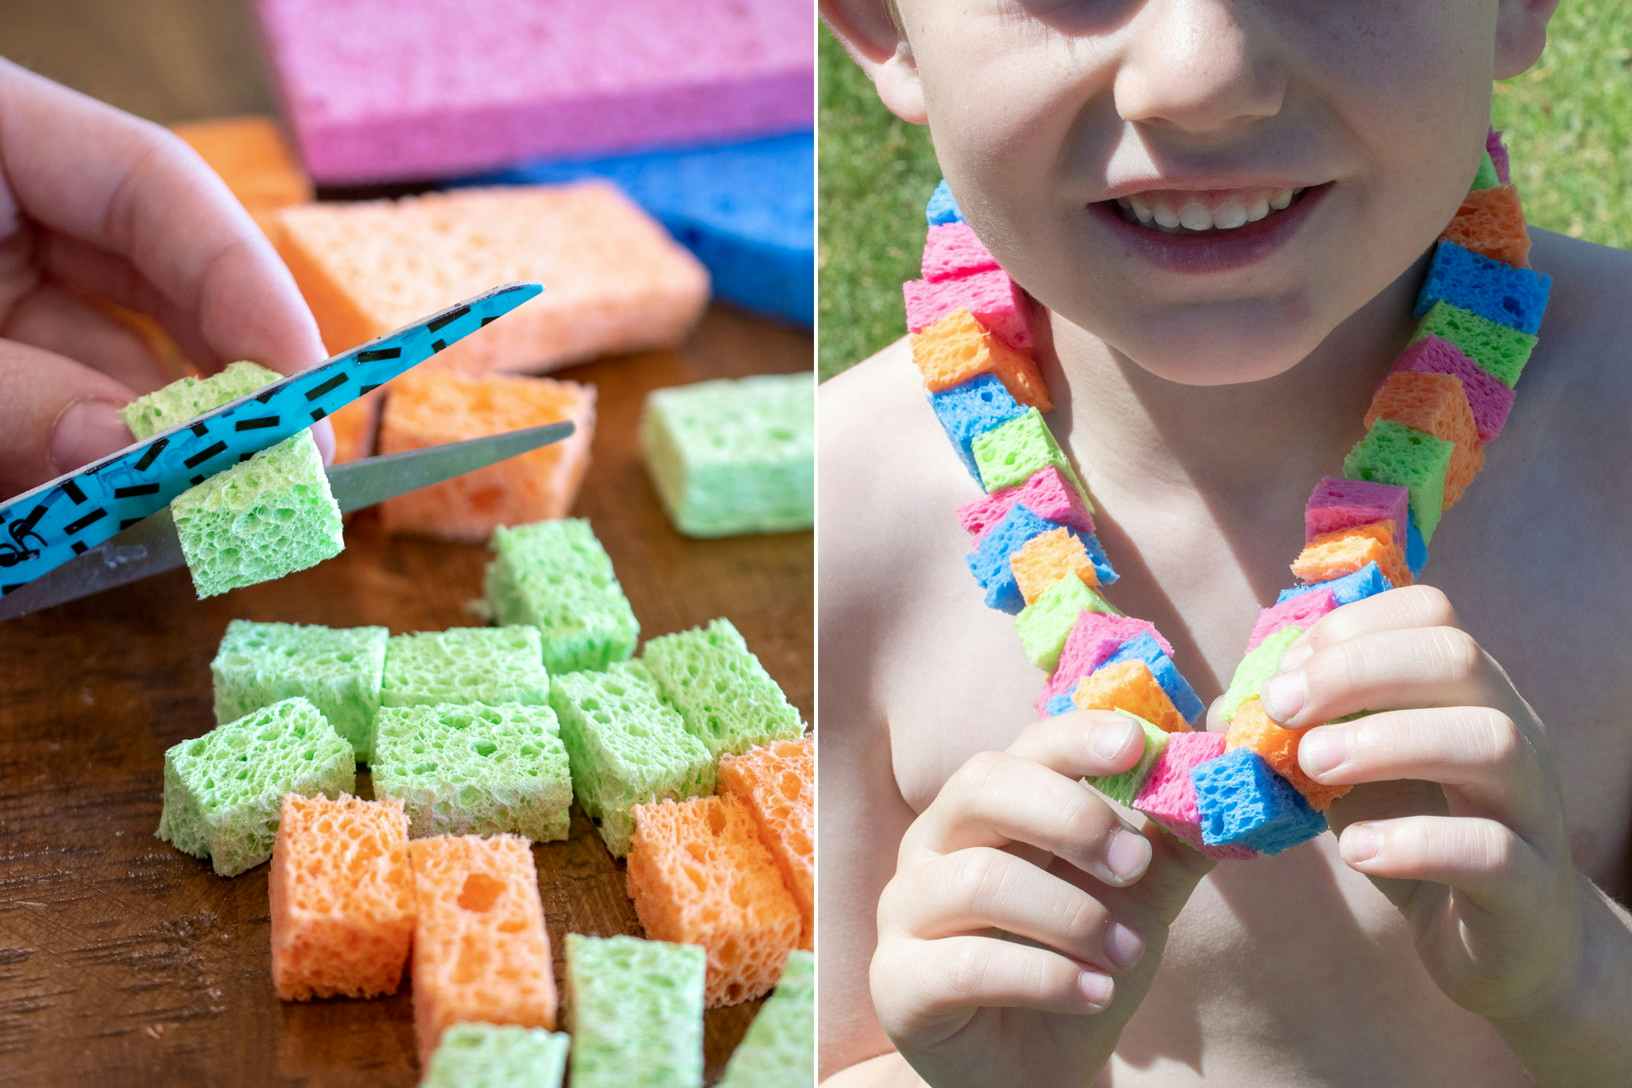 A person's hand using scissors to cut sponges into little squares, and a child smiling and wearing a necklace made of the little sponges.